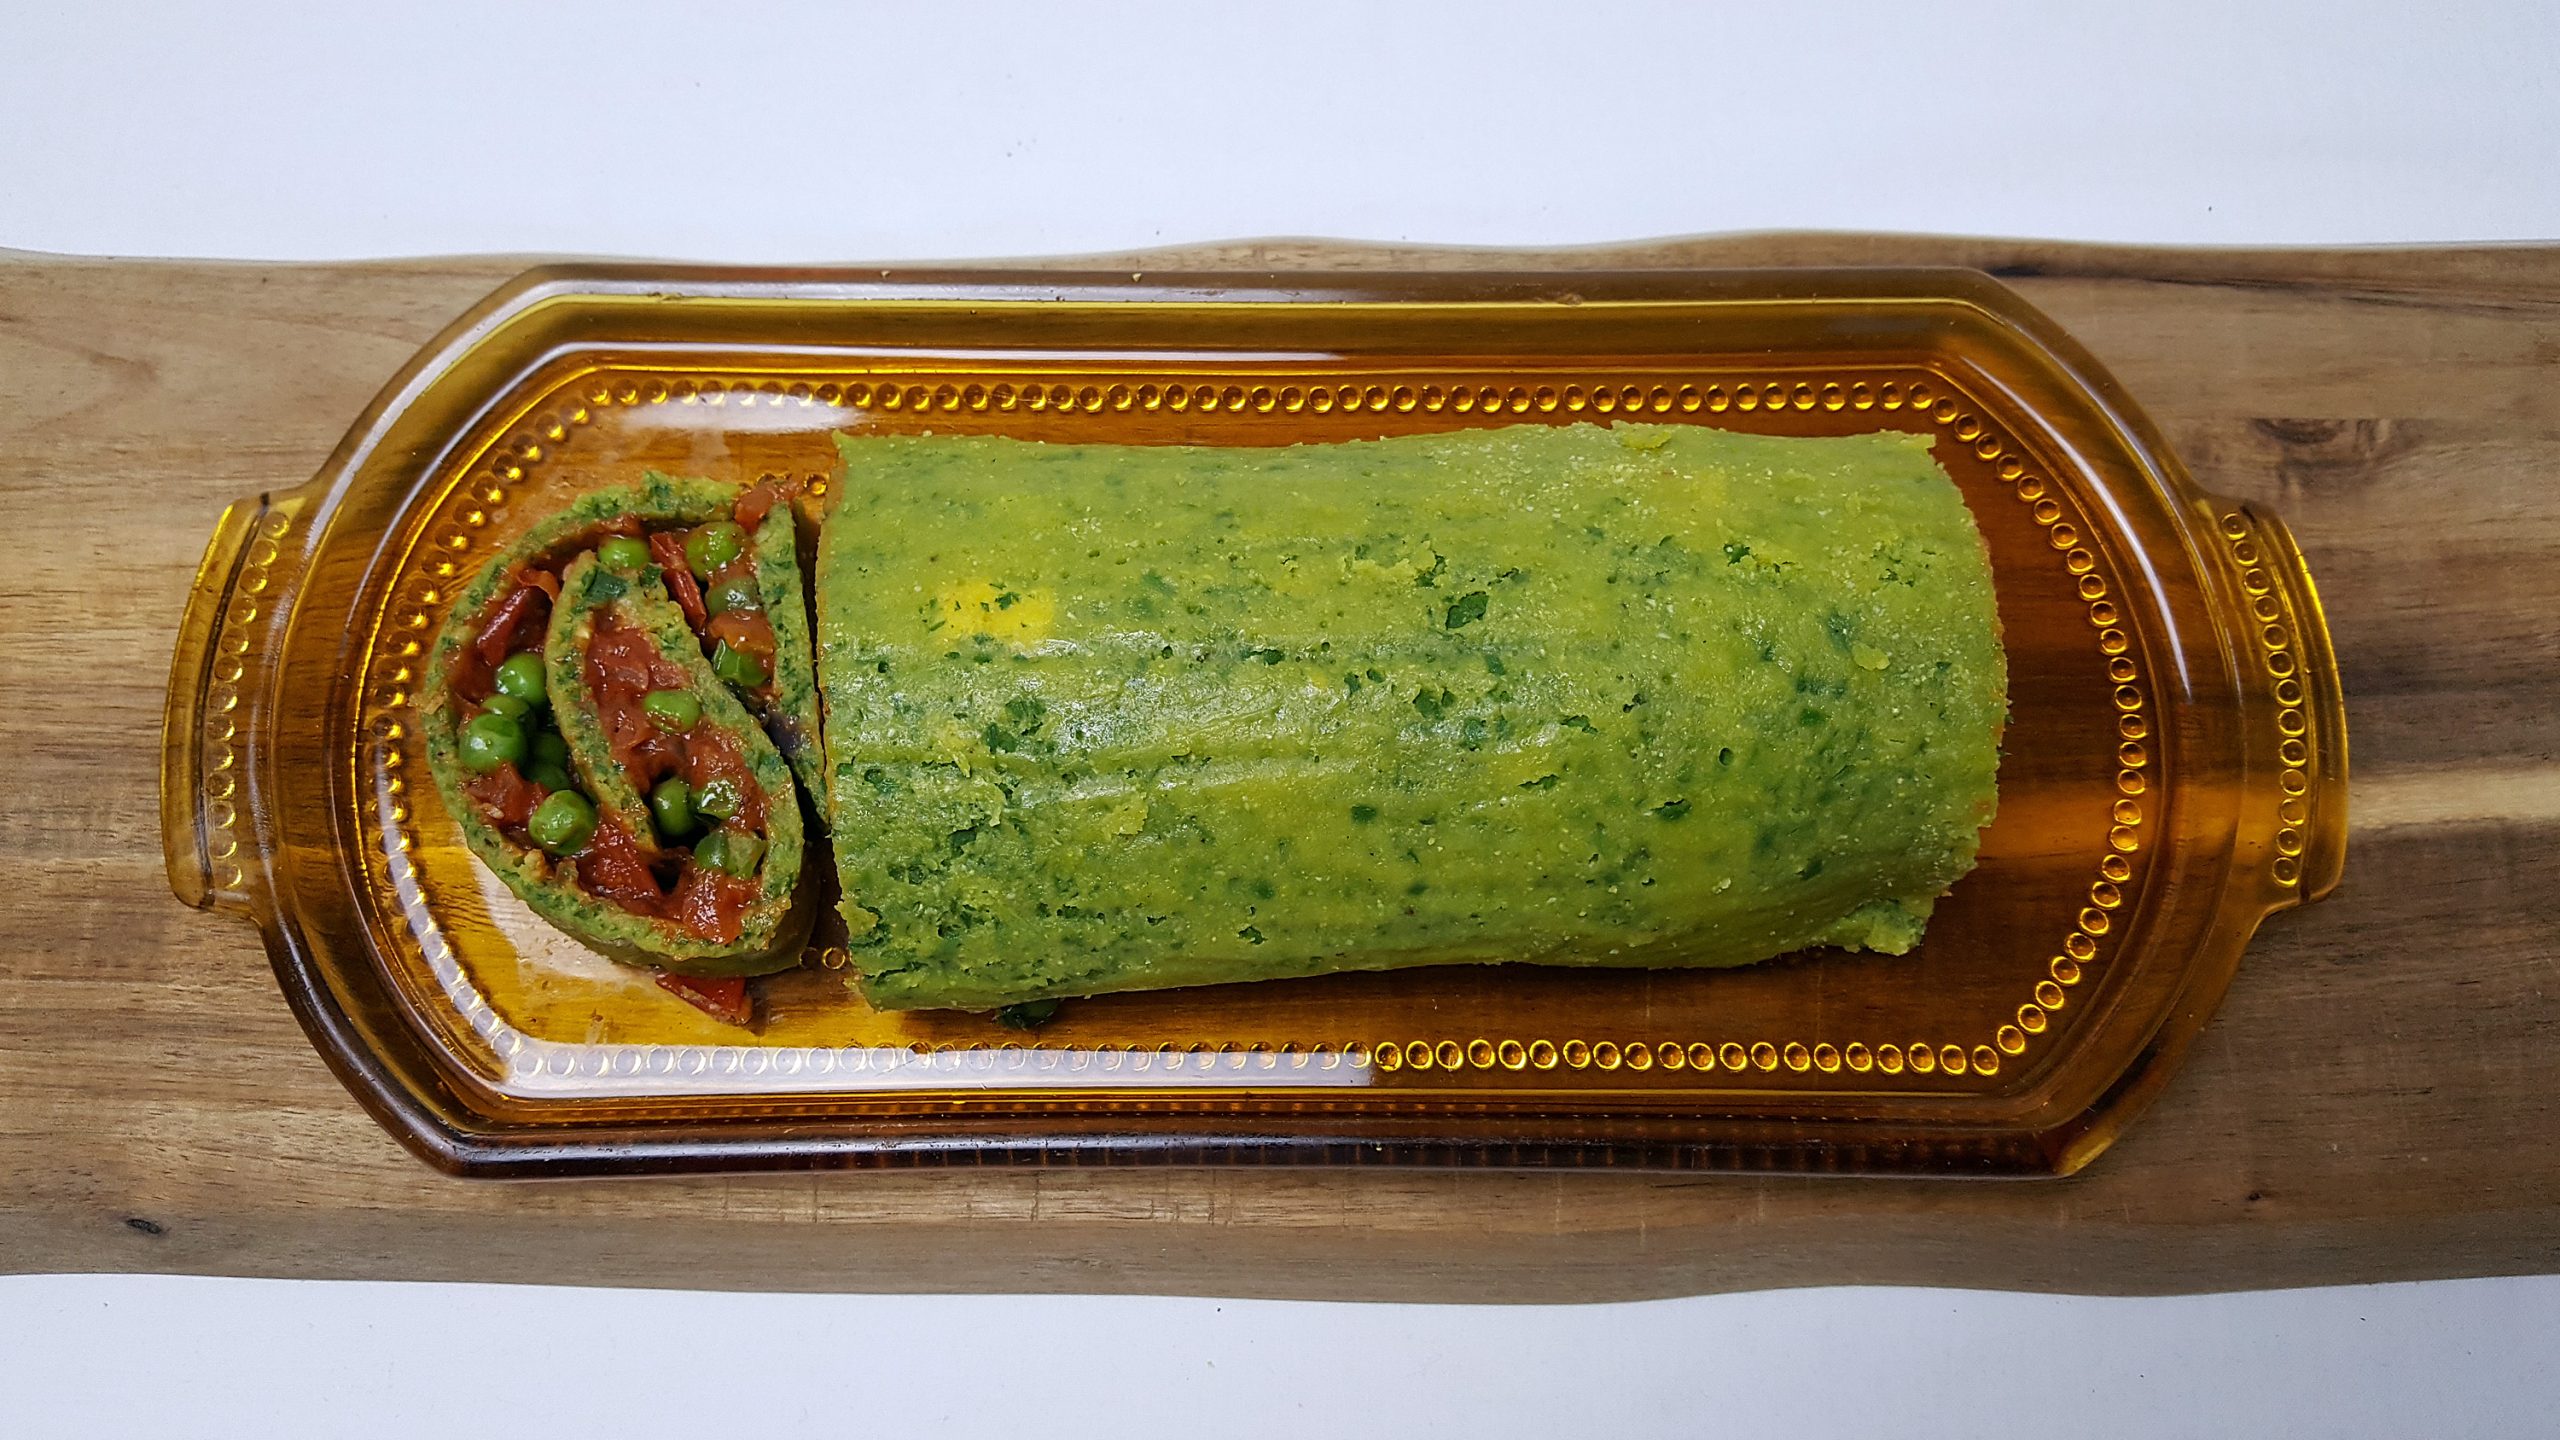 Spinatroulade